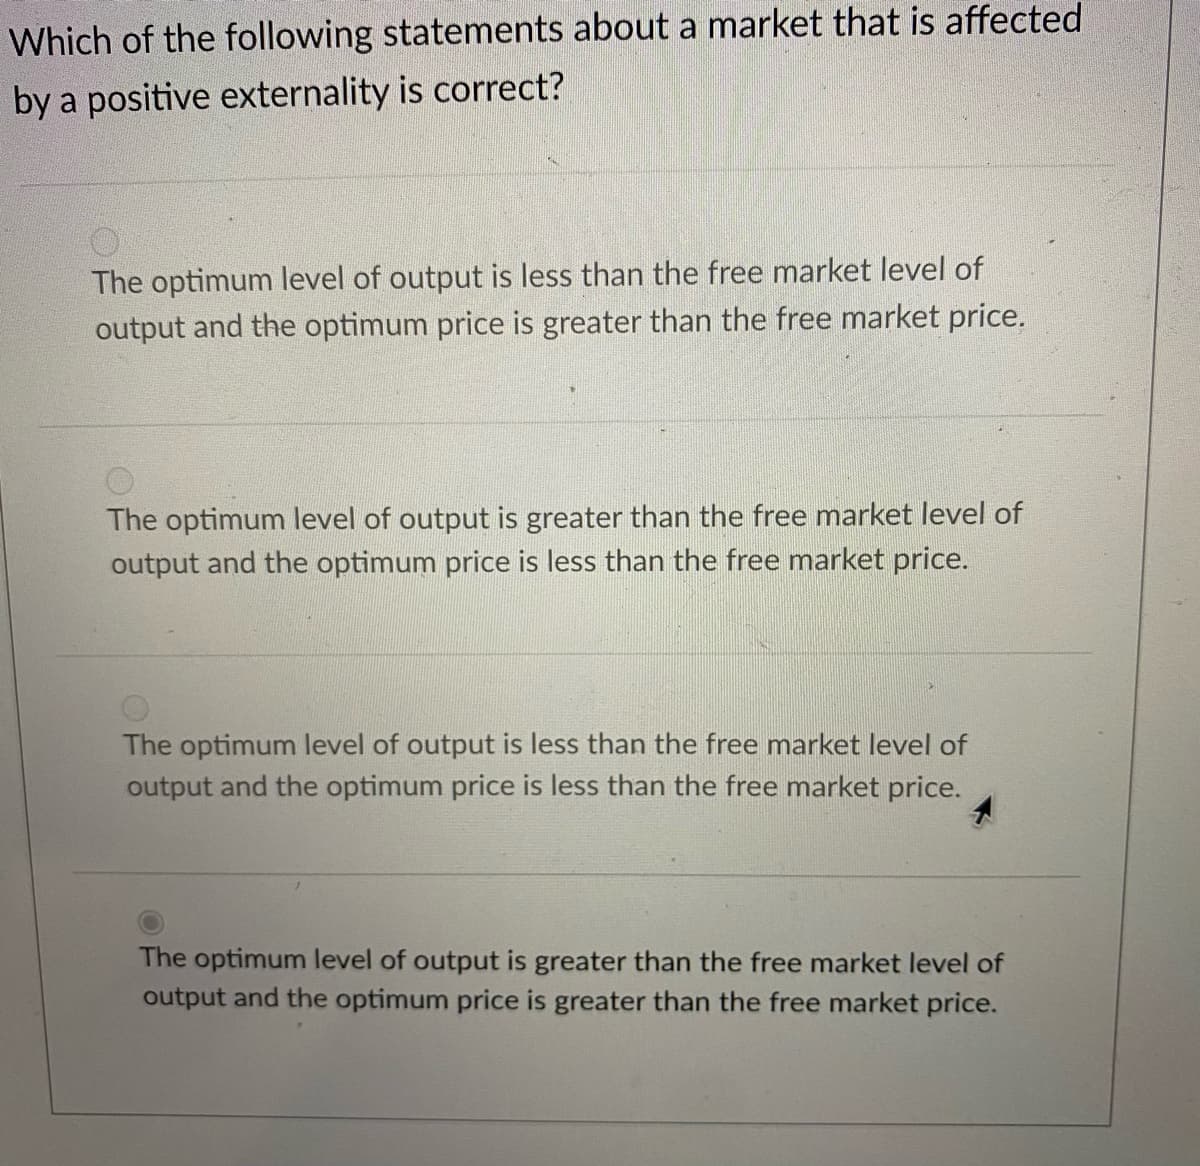 Which of the following statements about a market that is affected
by a positive externality is correct?
The optimum level of output is less than the free market level of
output and the optimum price is greater than the free market price.
The optimum level of output is greater than the free market level of
output and the optimum price is less than the free market price.
The optimum level of output is less than the free market level of
output and the optimum price is less than the free market price.
The optimum level of output is greater than the free market level of
output and the optimum price is greater than the free market price.
